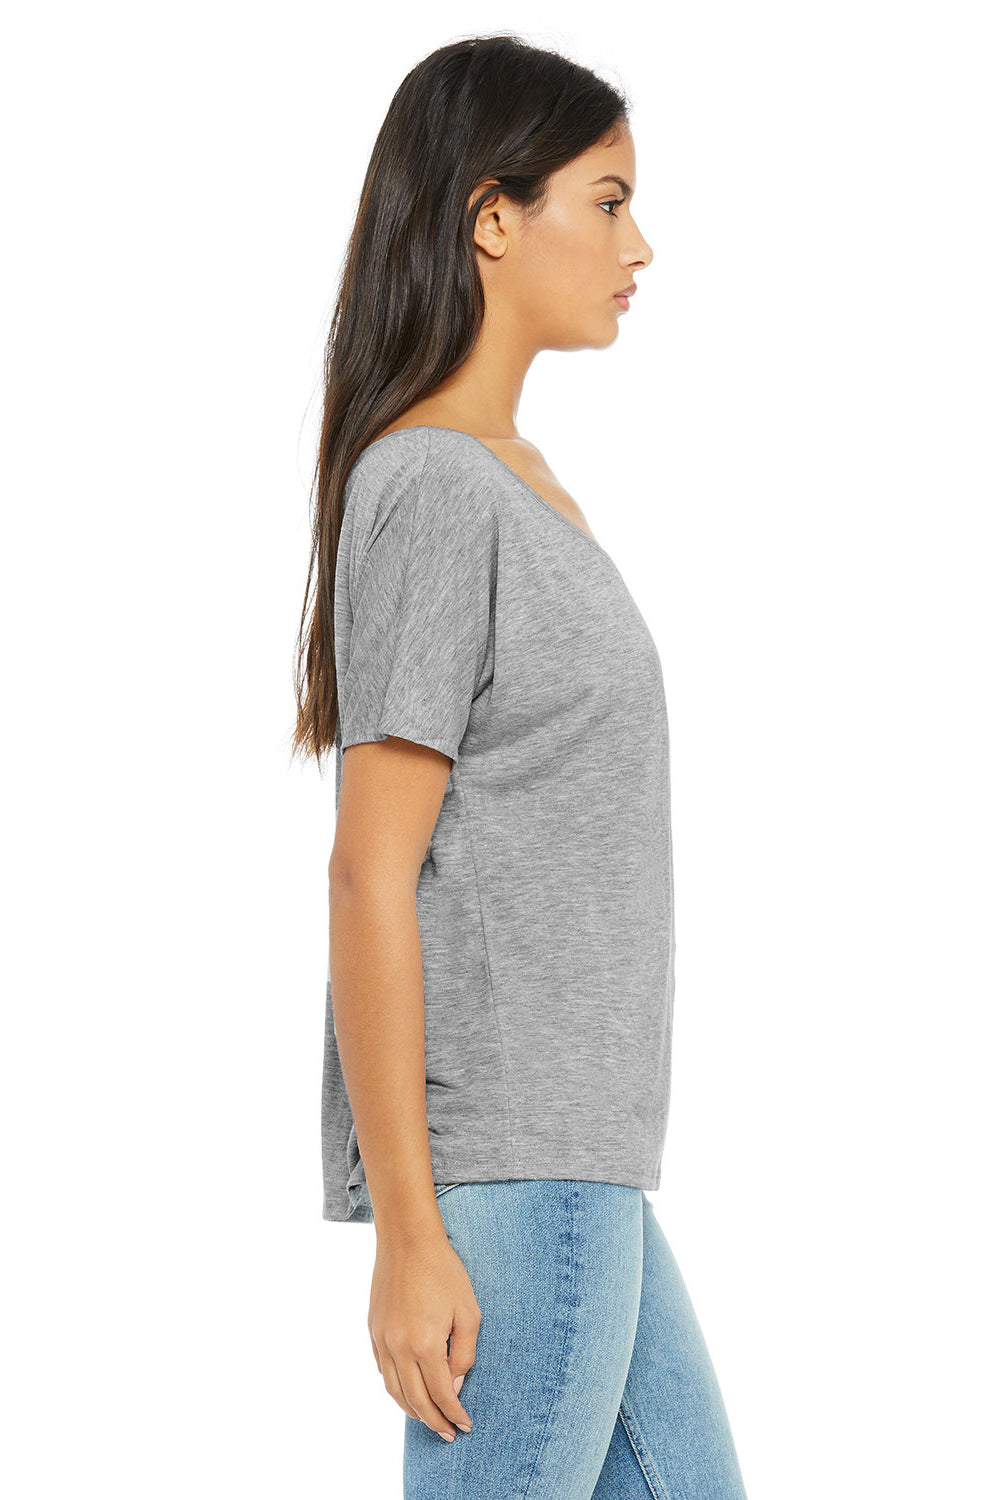 Bella + Canvas BC8816/8816 Womens Slouchy Short Sleeve Wide Neck T-Shirt Heather Grey Model Side